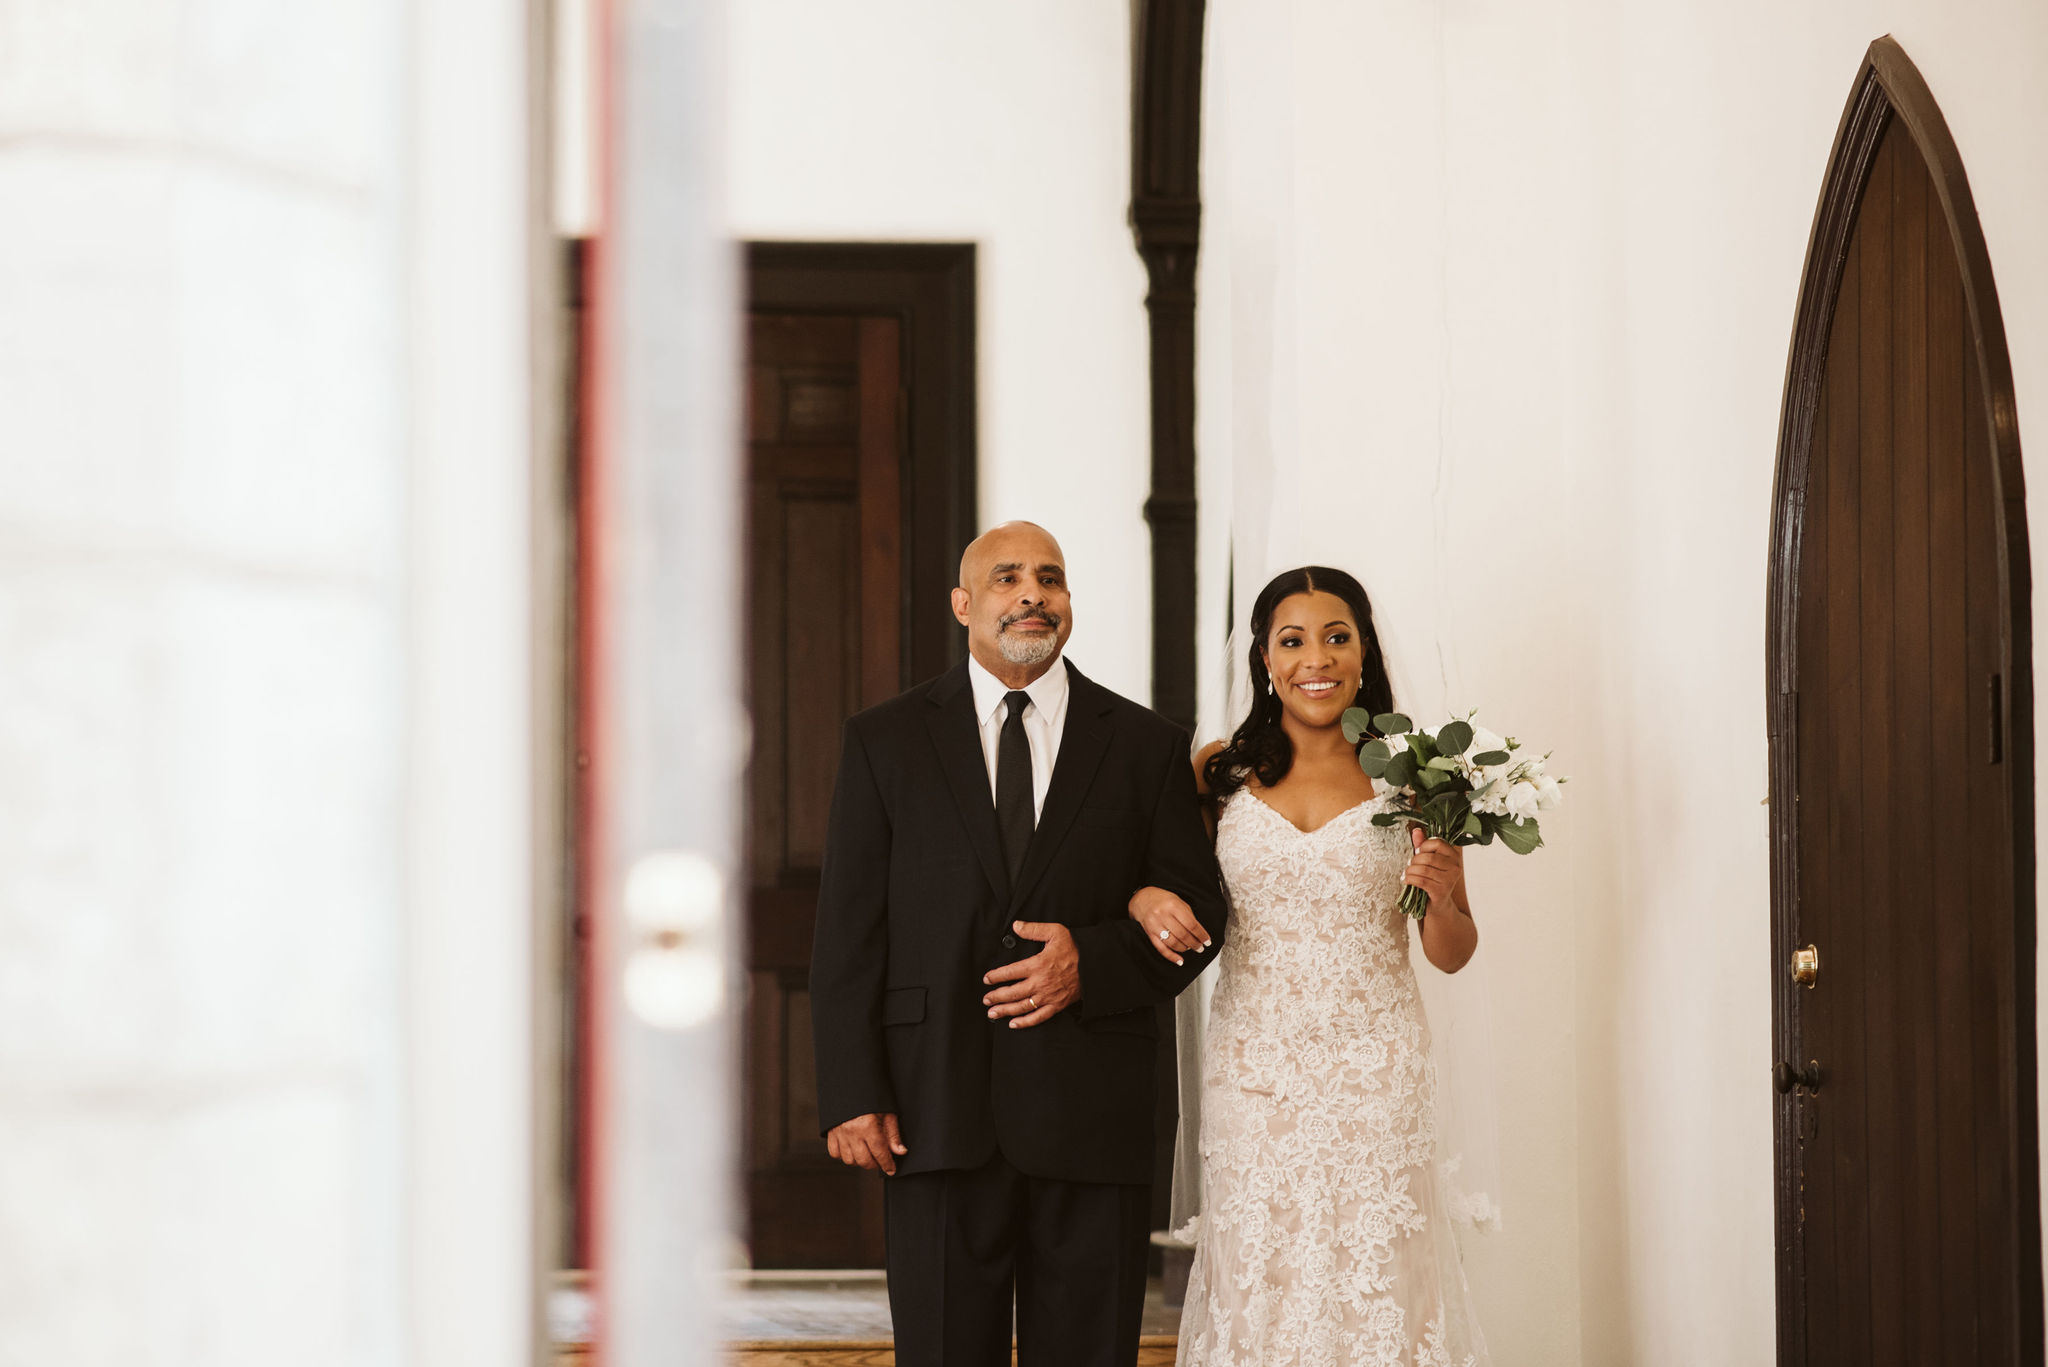  Baltimore, Maryland Wedding Photographer, Mount Vernon, Chase Court, Classic, Outdoor Ceremony, Garden, Romantic, Smiling Bride Walking with Father of the Bride 